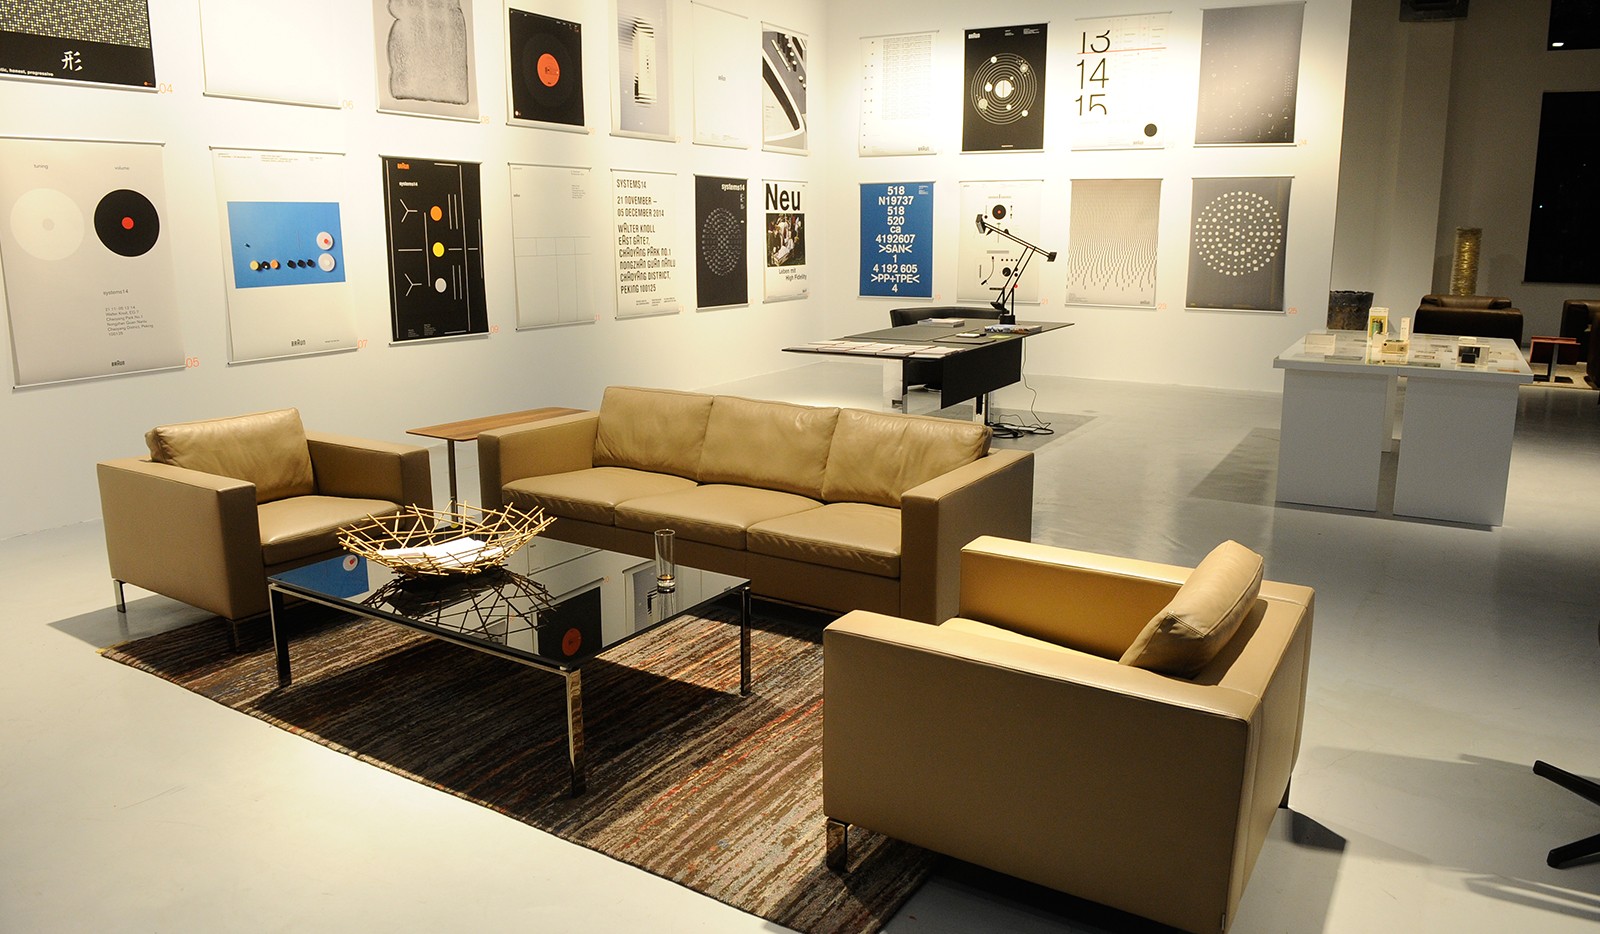 Systems14 Exhibition Beijing with Walter Knoll